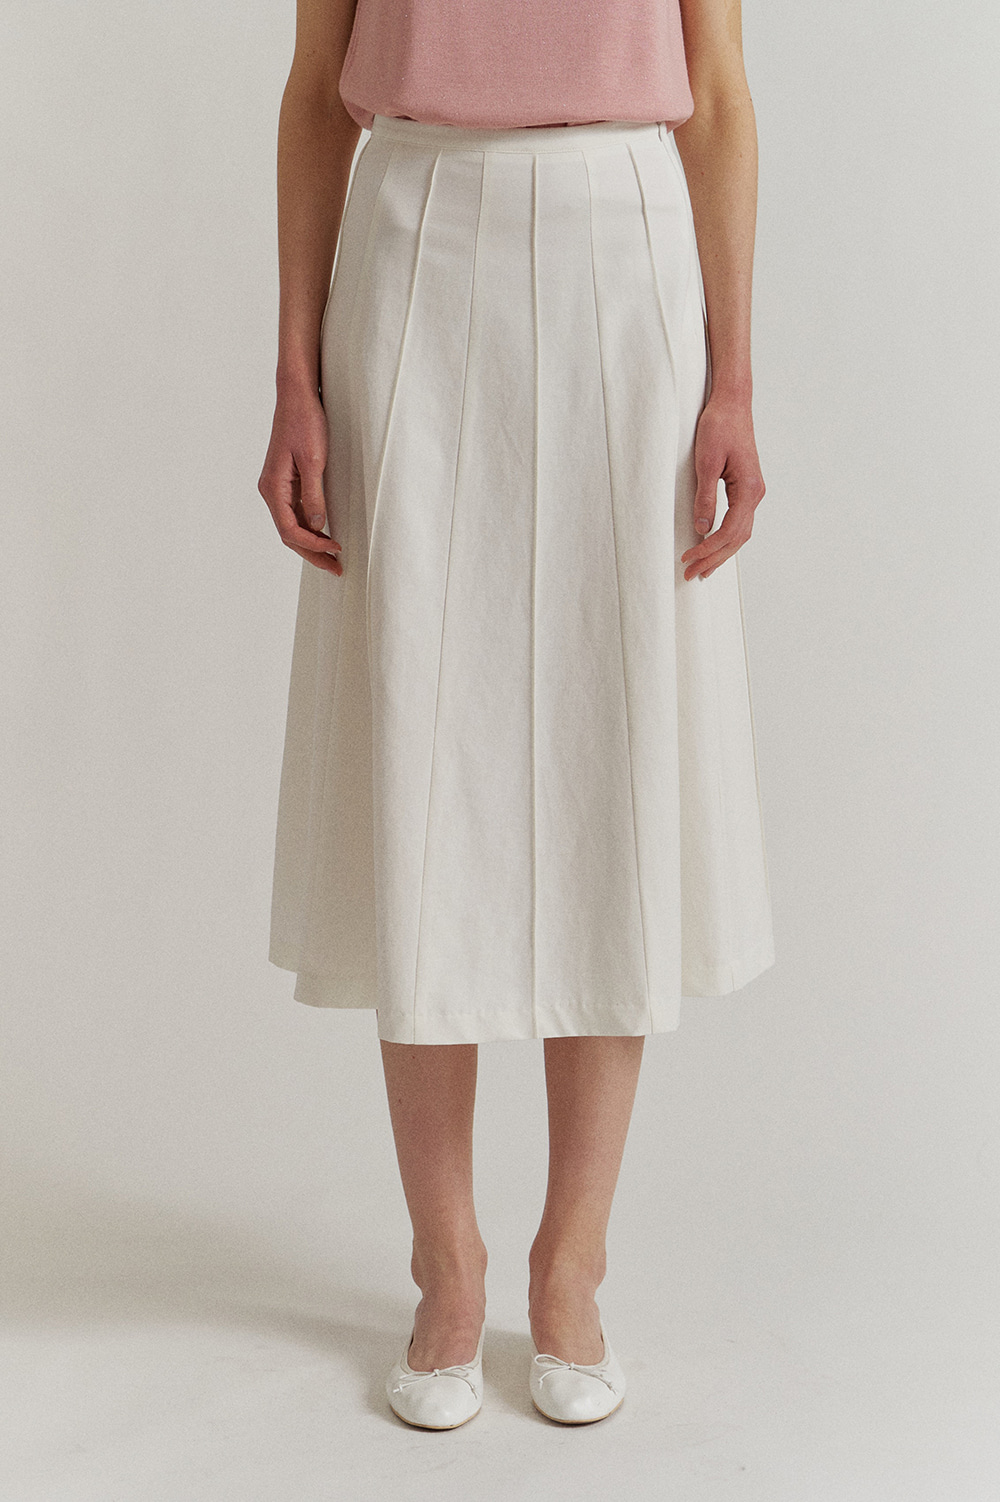 Lily Pleats Skirt in Pure White